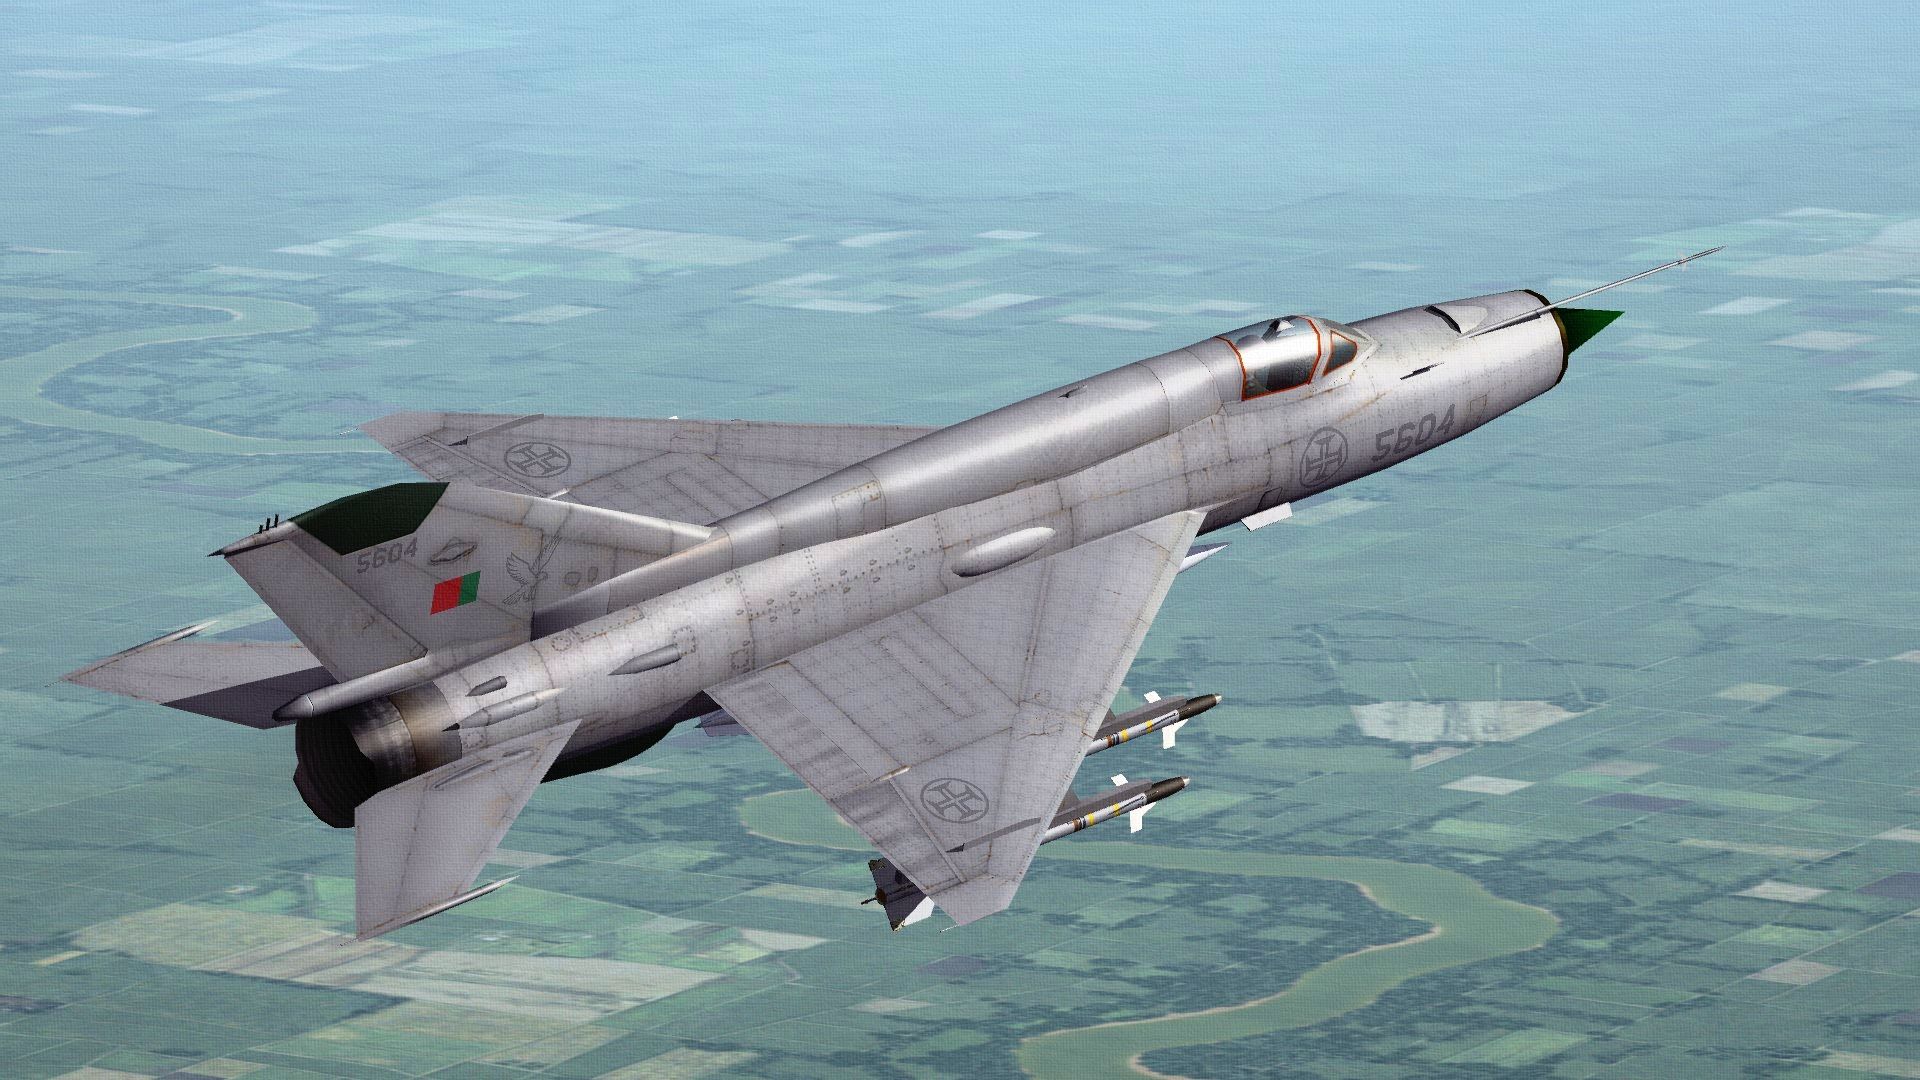 FAP%20MiG-21BIS%20FISHBED.07_zps4f98miey